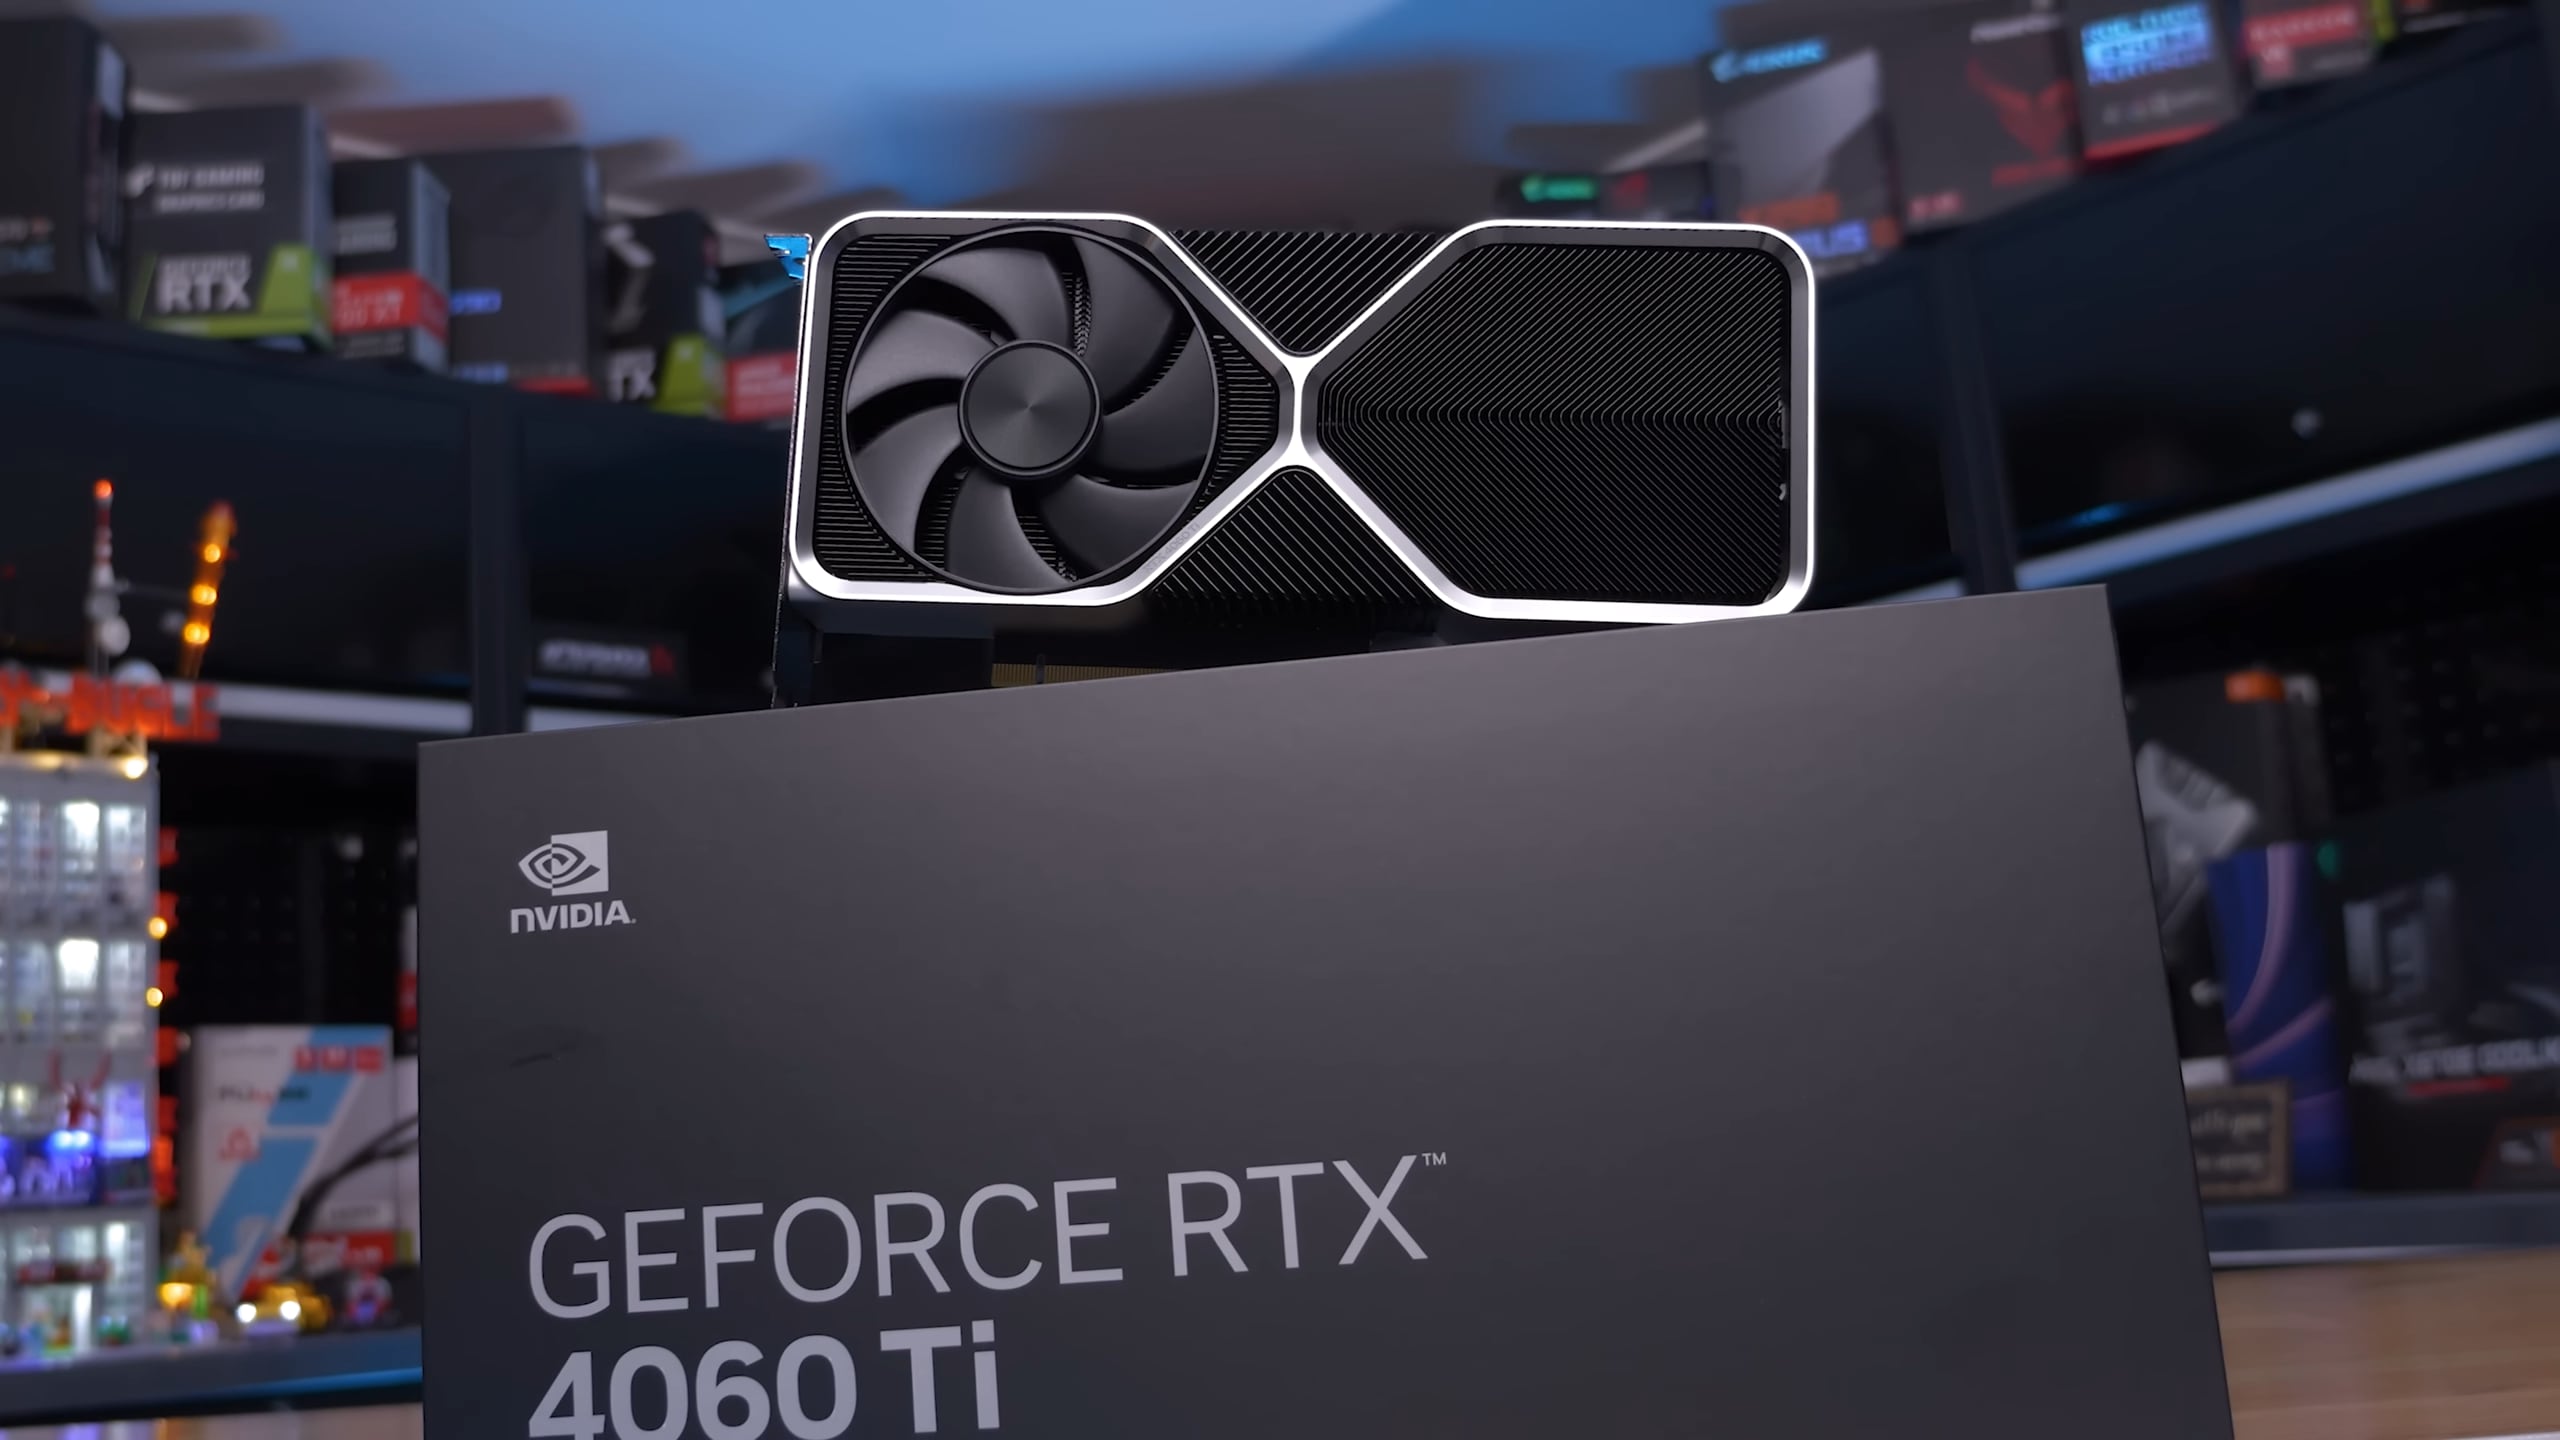 Japanese stores open late for RTX 4060 Ti launch, one person turns up